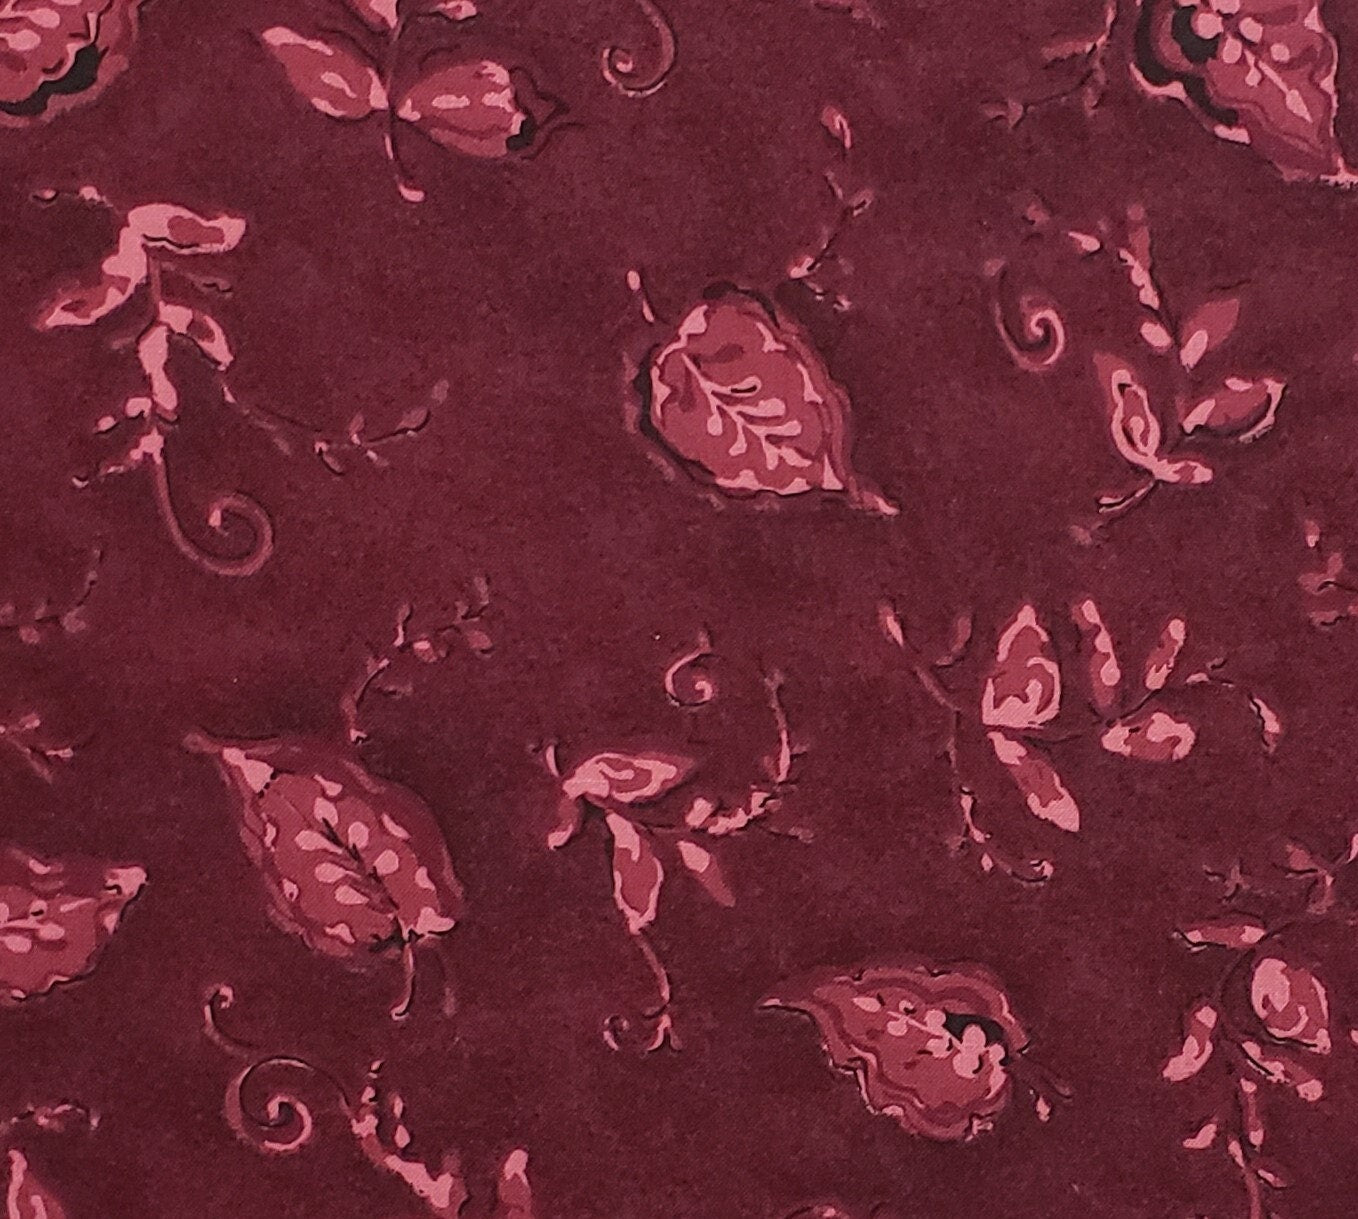 Classic Cottons 2005 - Deep Wine Fabric with Tone-on-Tone Leaf Print